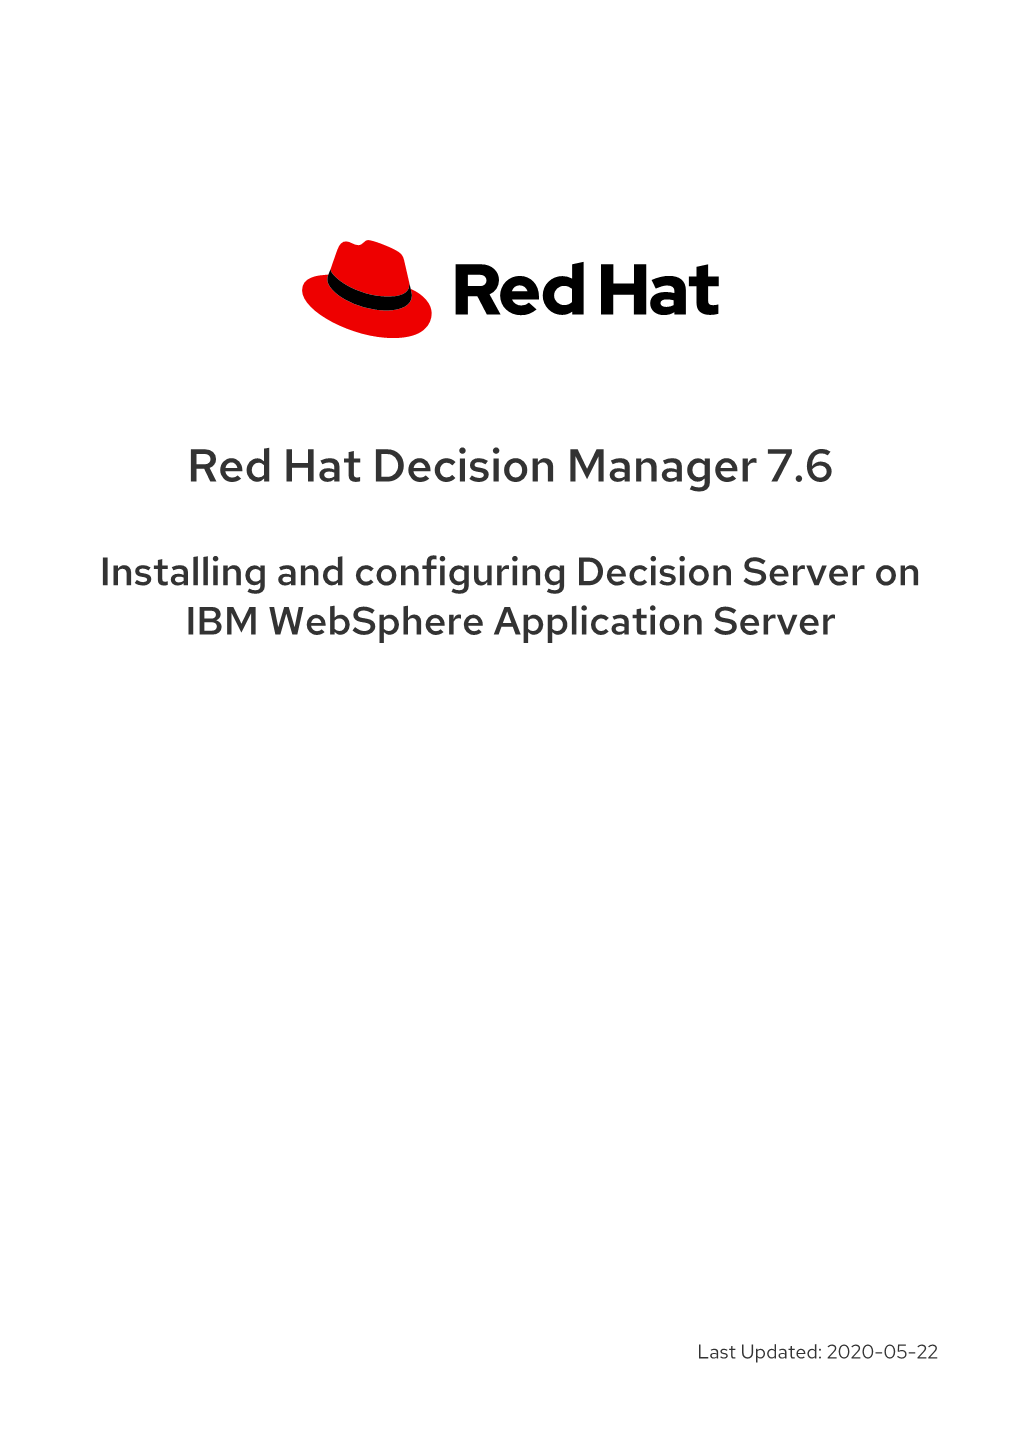 Red Hat Decision Manager 7.6 Installing and Configuring Decision Server on IBM Websphere Application Server